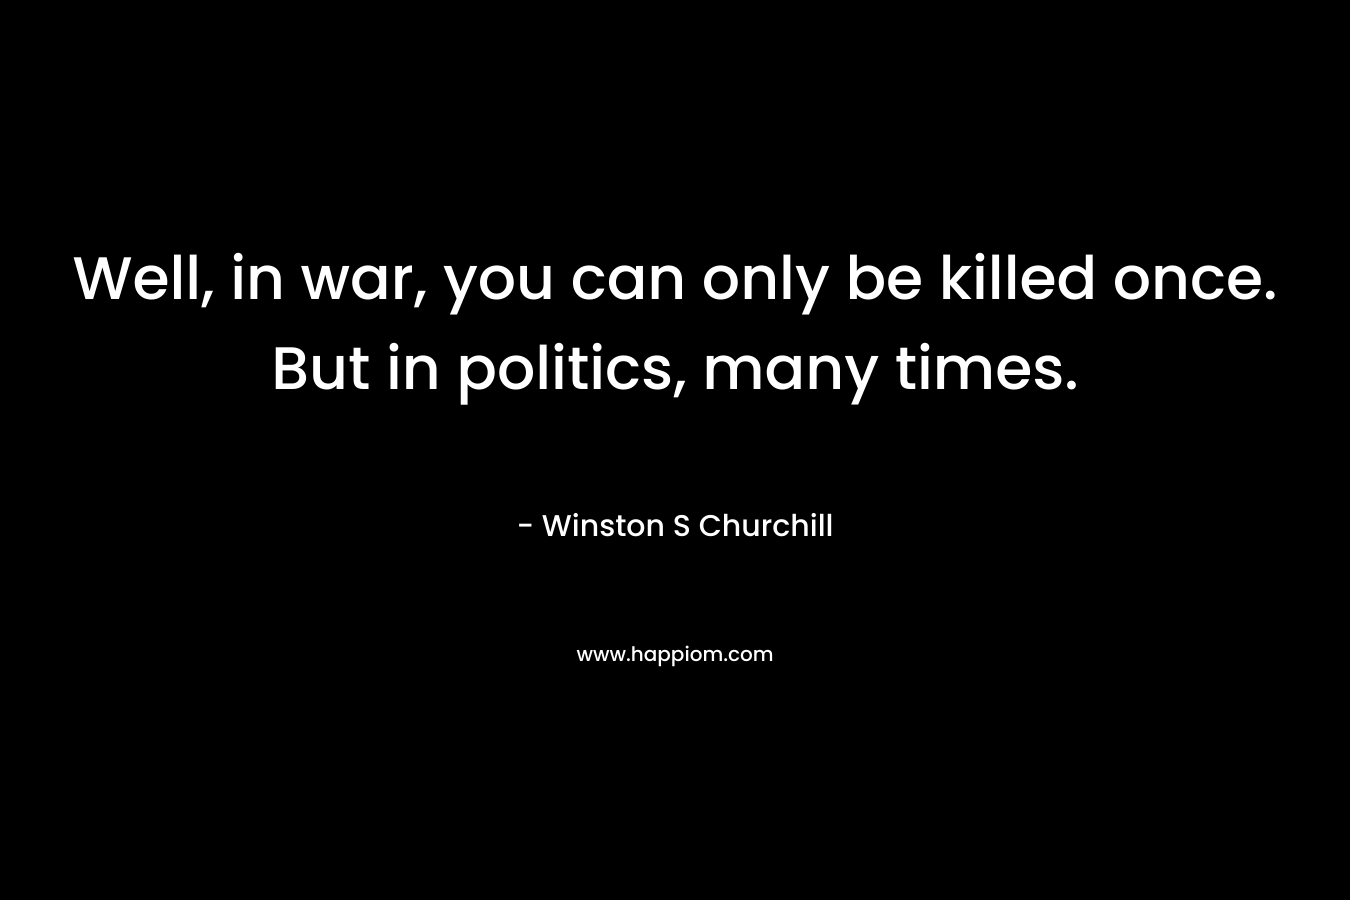 Well, in war, you can only be killed once. But in politics, many times.